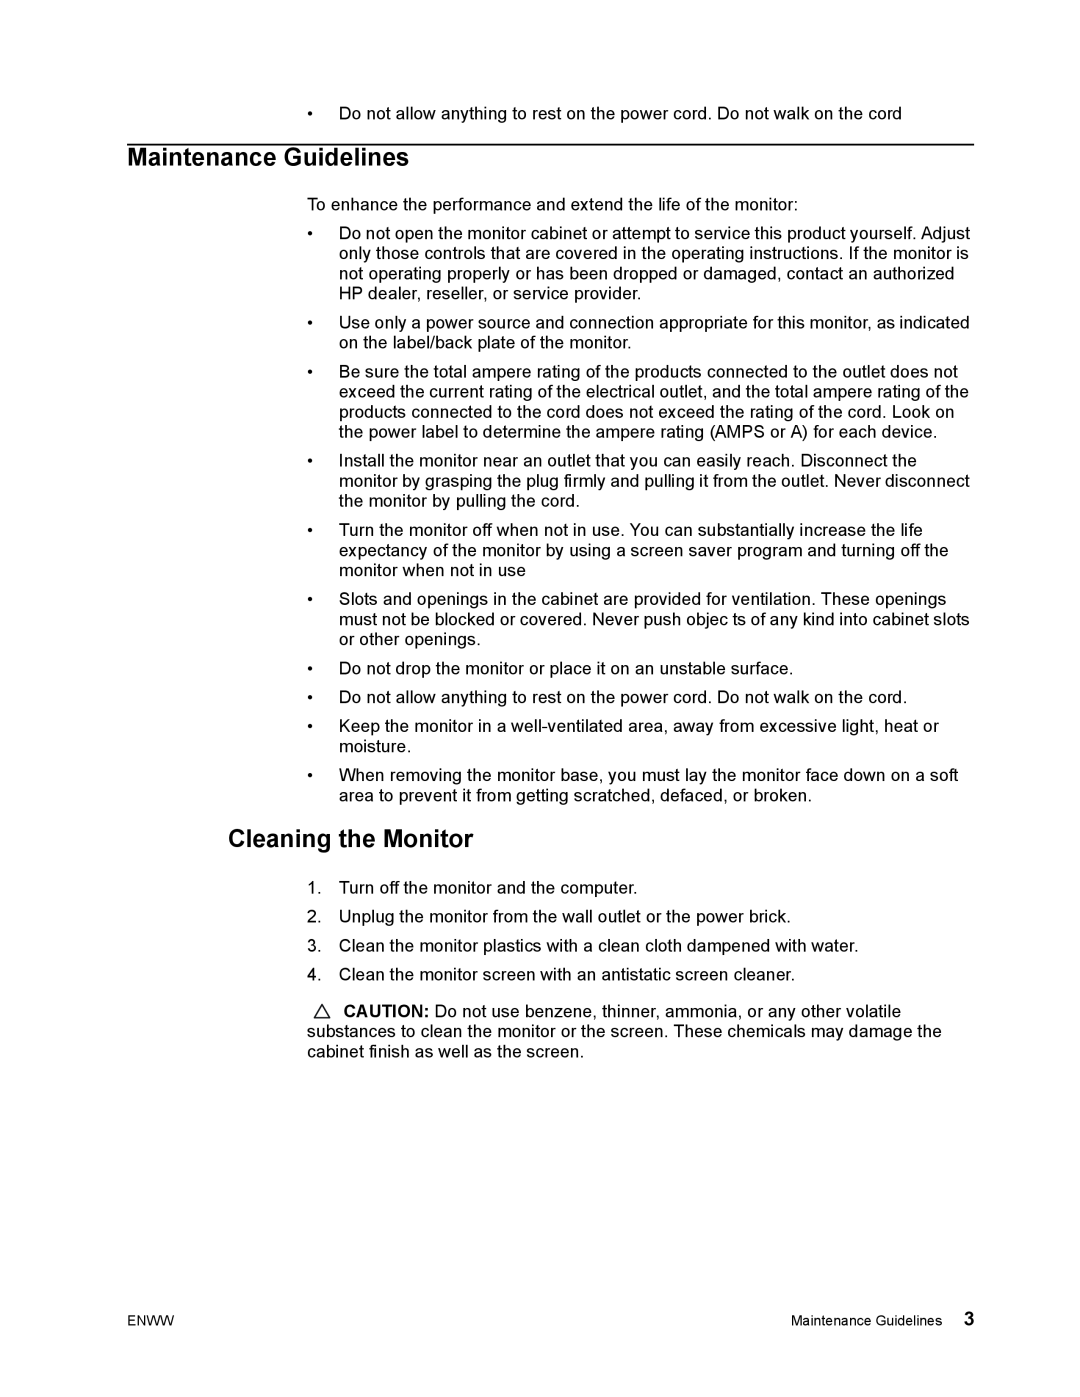 HP S1922 manual Maintenance Guidelines, Cleaning the Monitor 